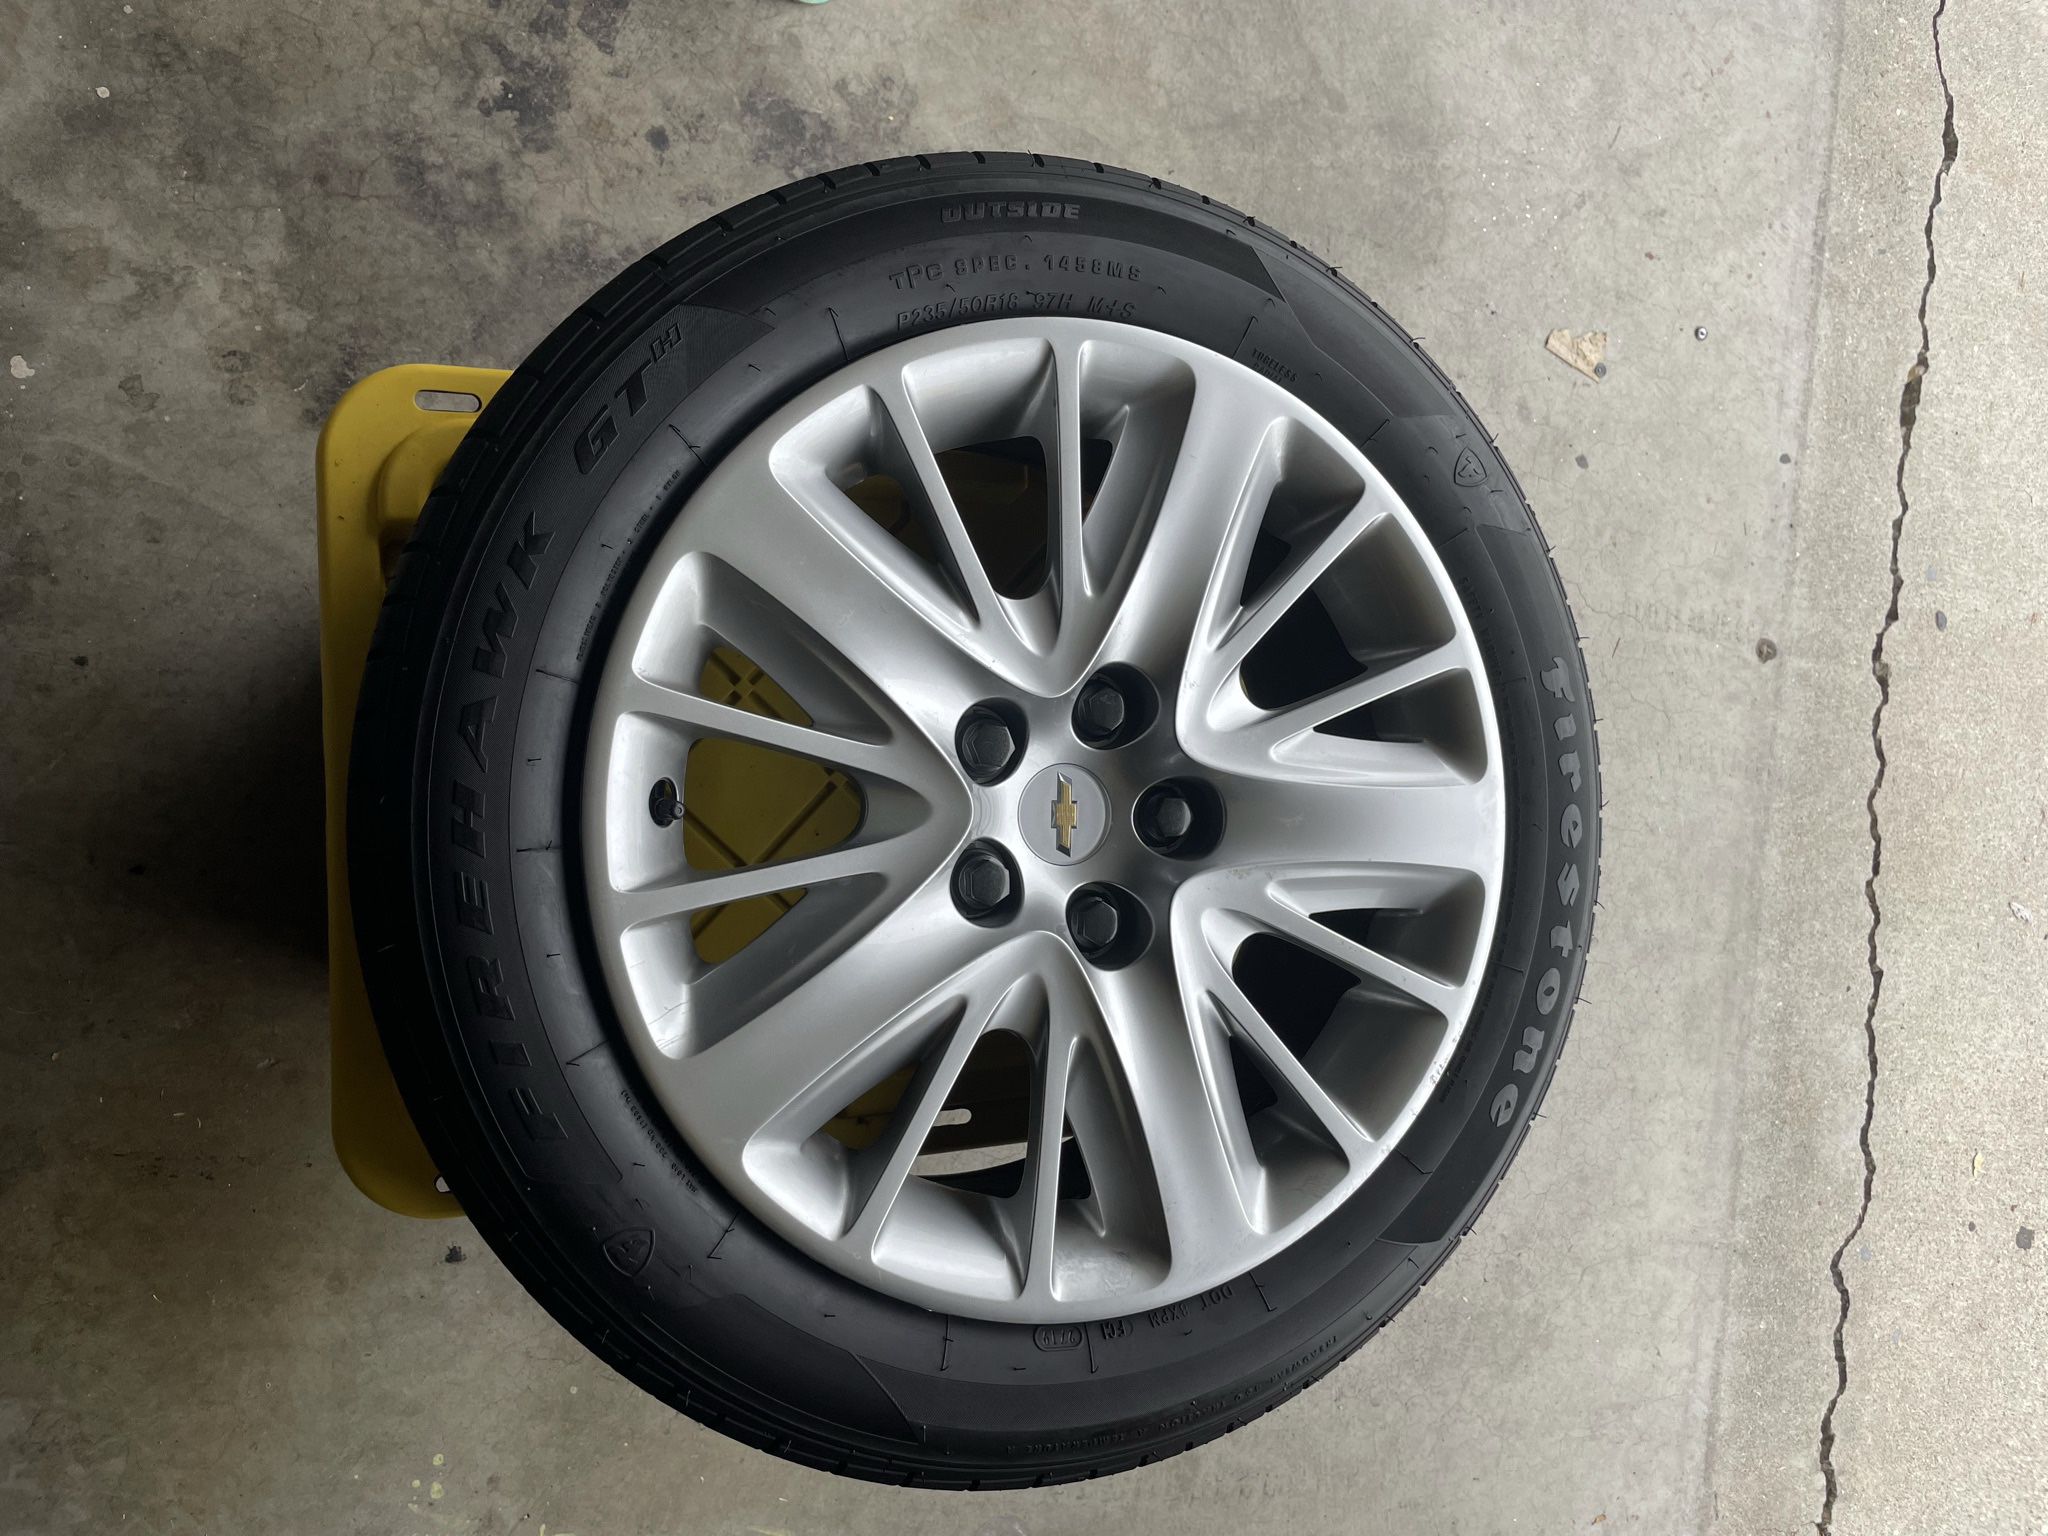 2019 Chevy Impala Stock Wheels And Tires (Set Of 4)